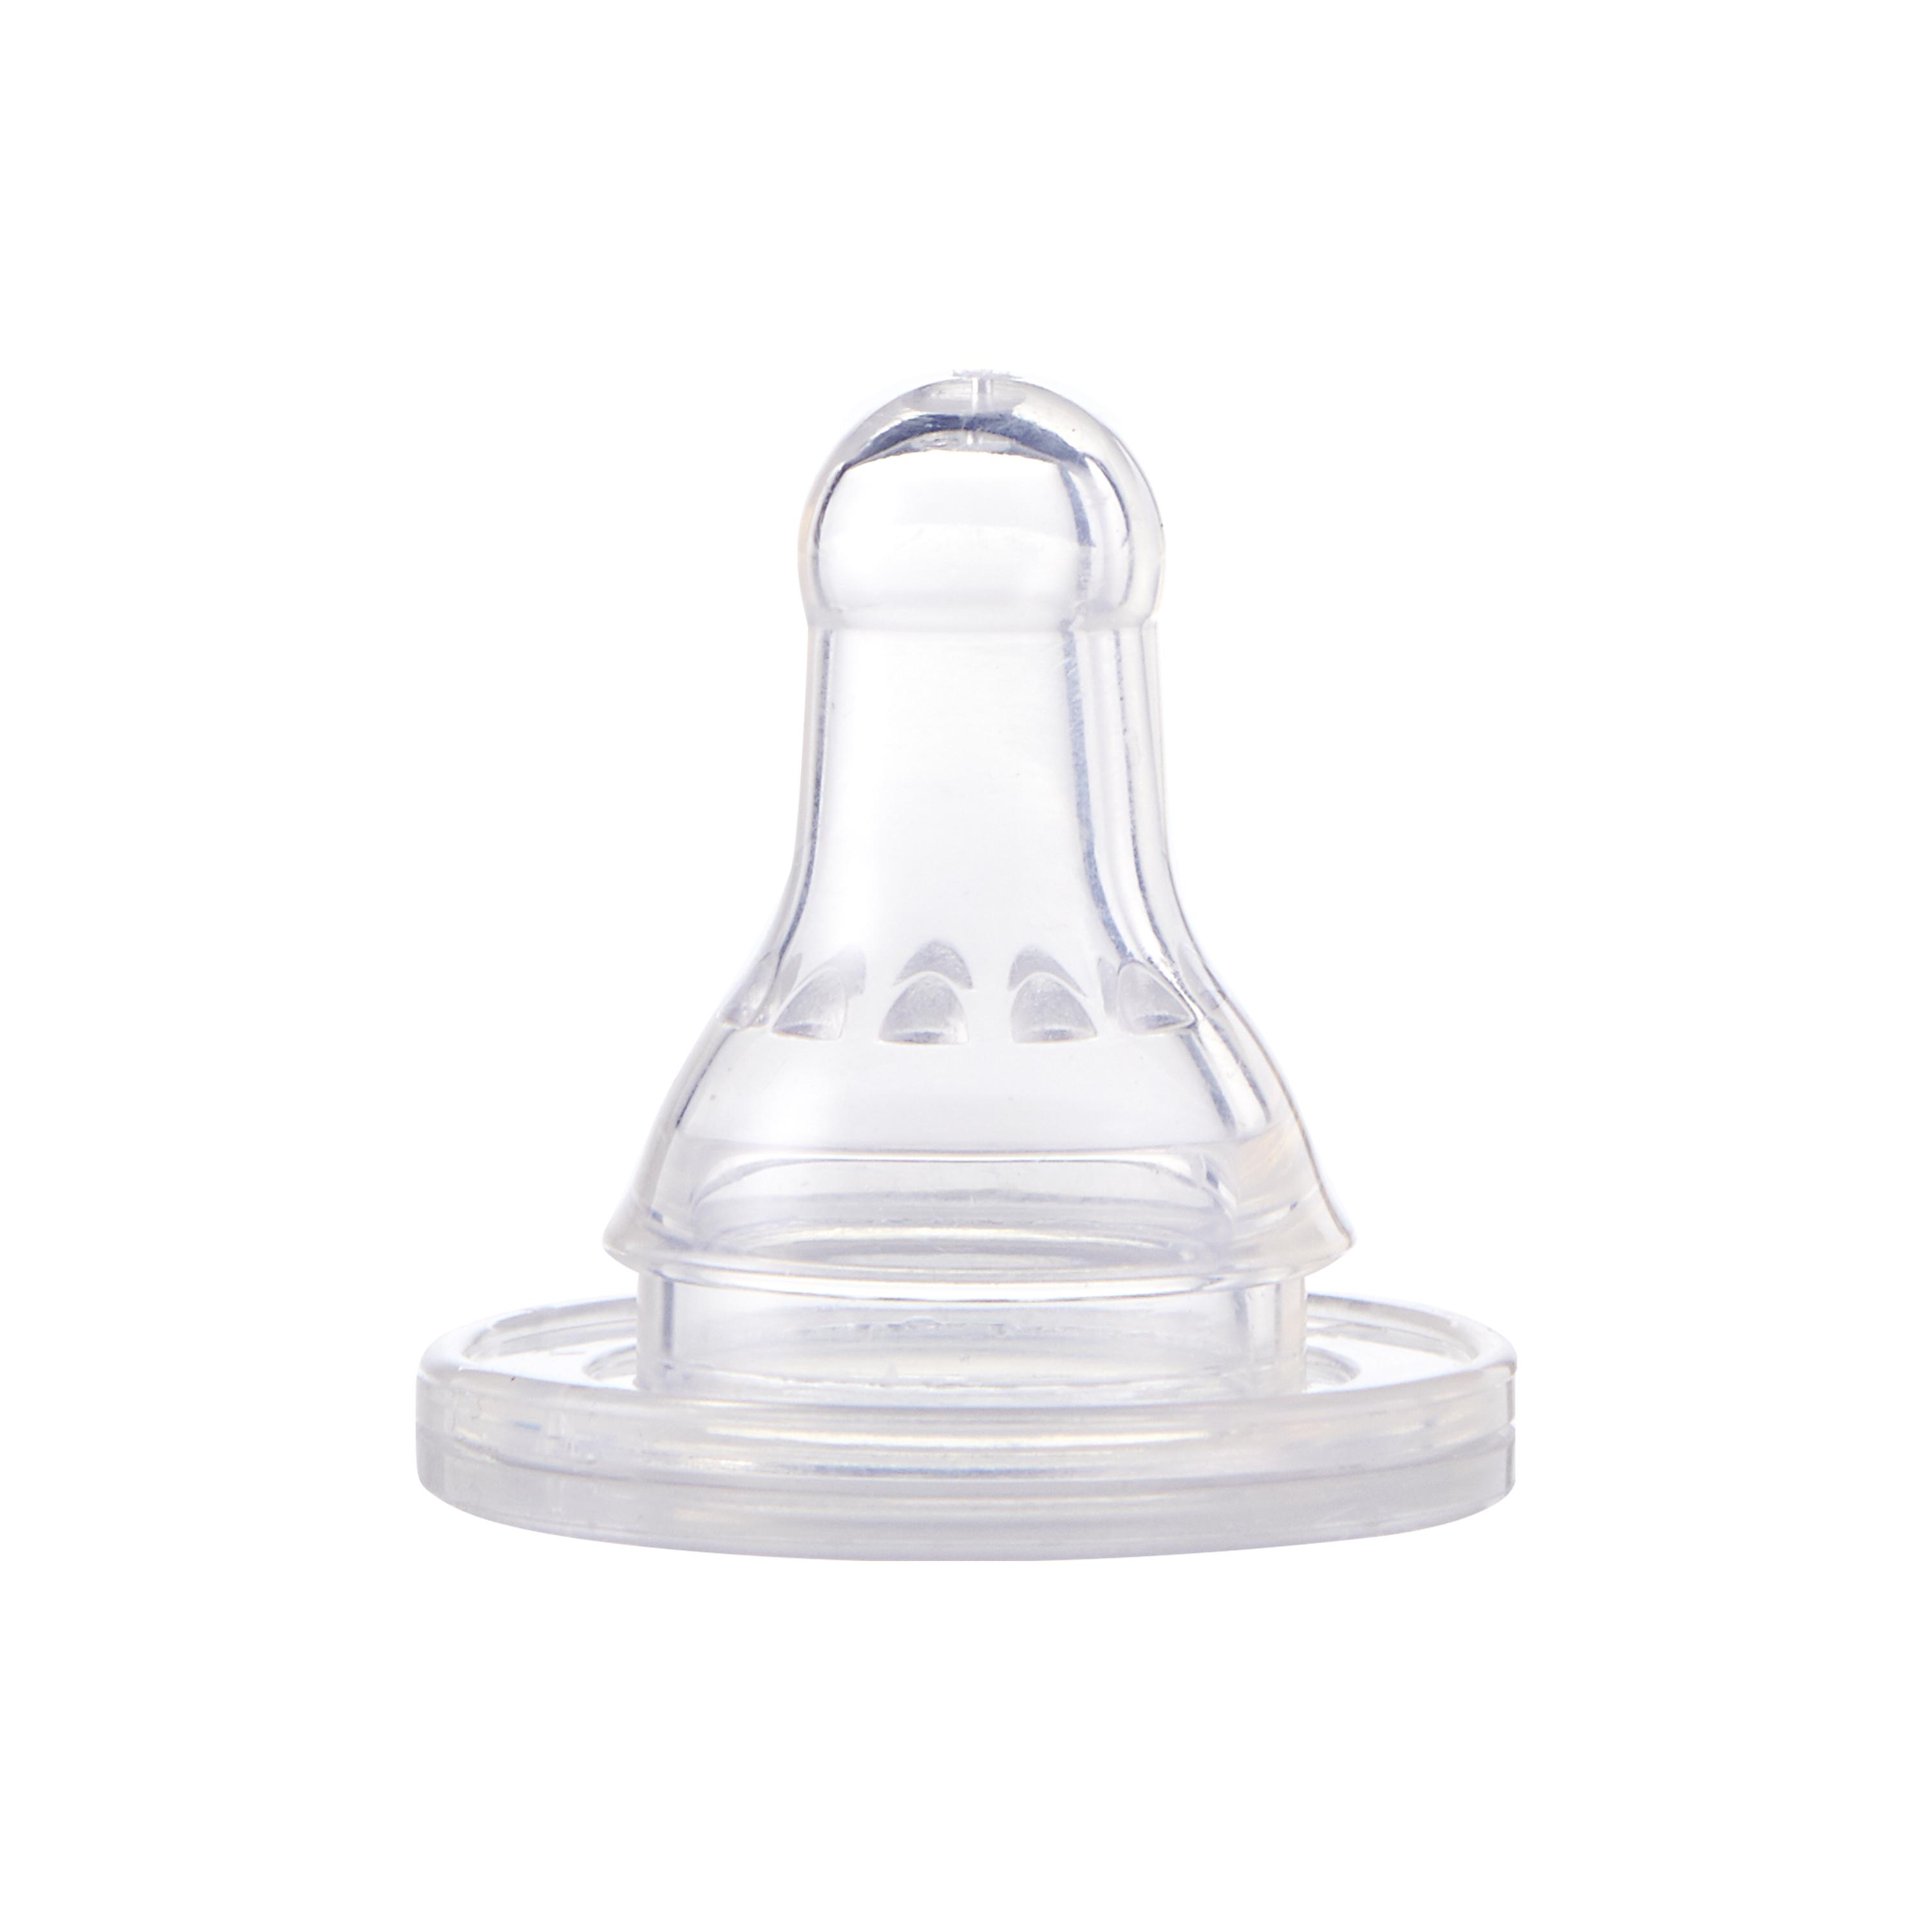 First Essentials by NUK™ Clear View® 5oz Bottle Product Image 4 of 4